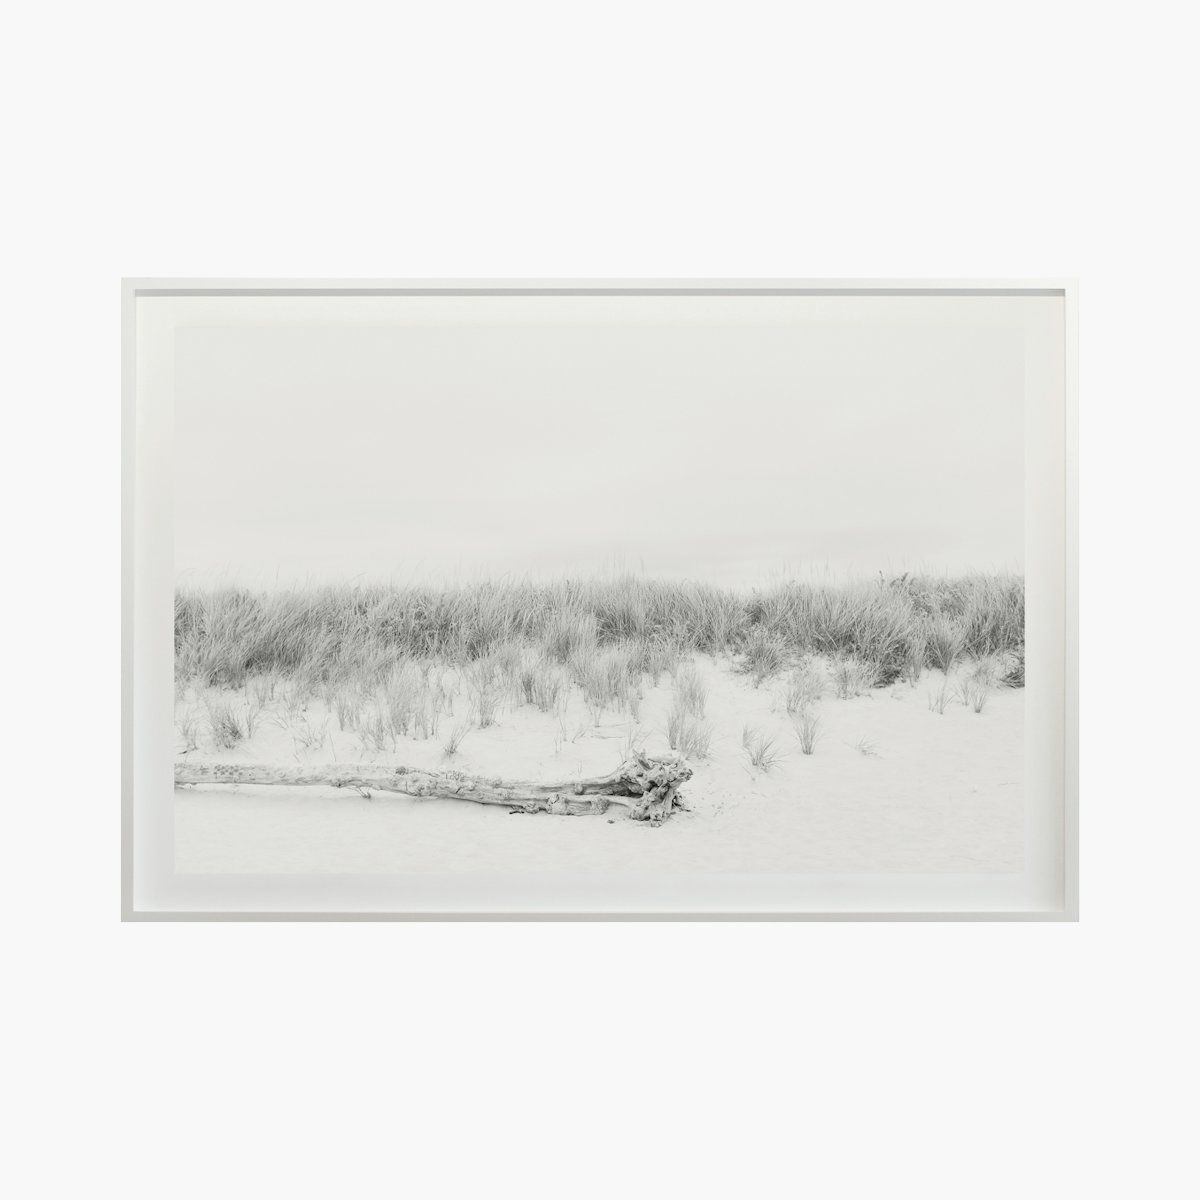 “Dunes No. 1420” by Cas Friese